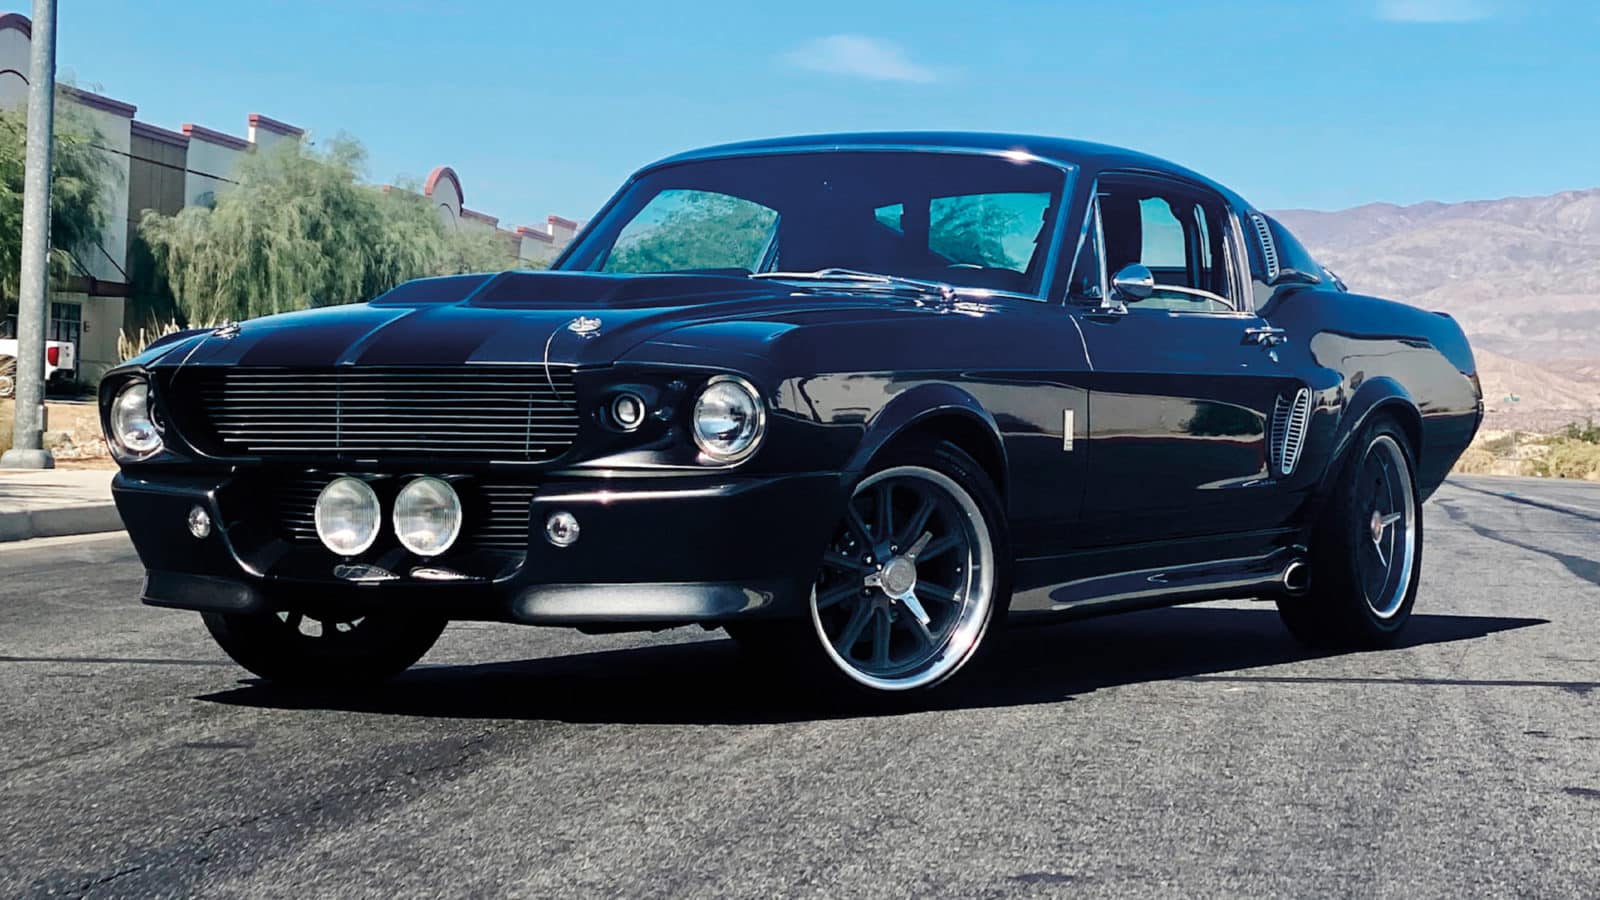 1967 Ford Mustang Eleanor tribute